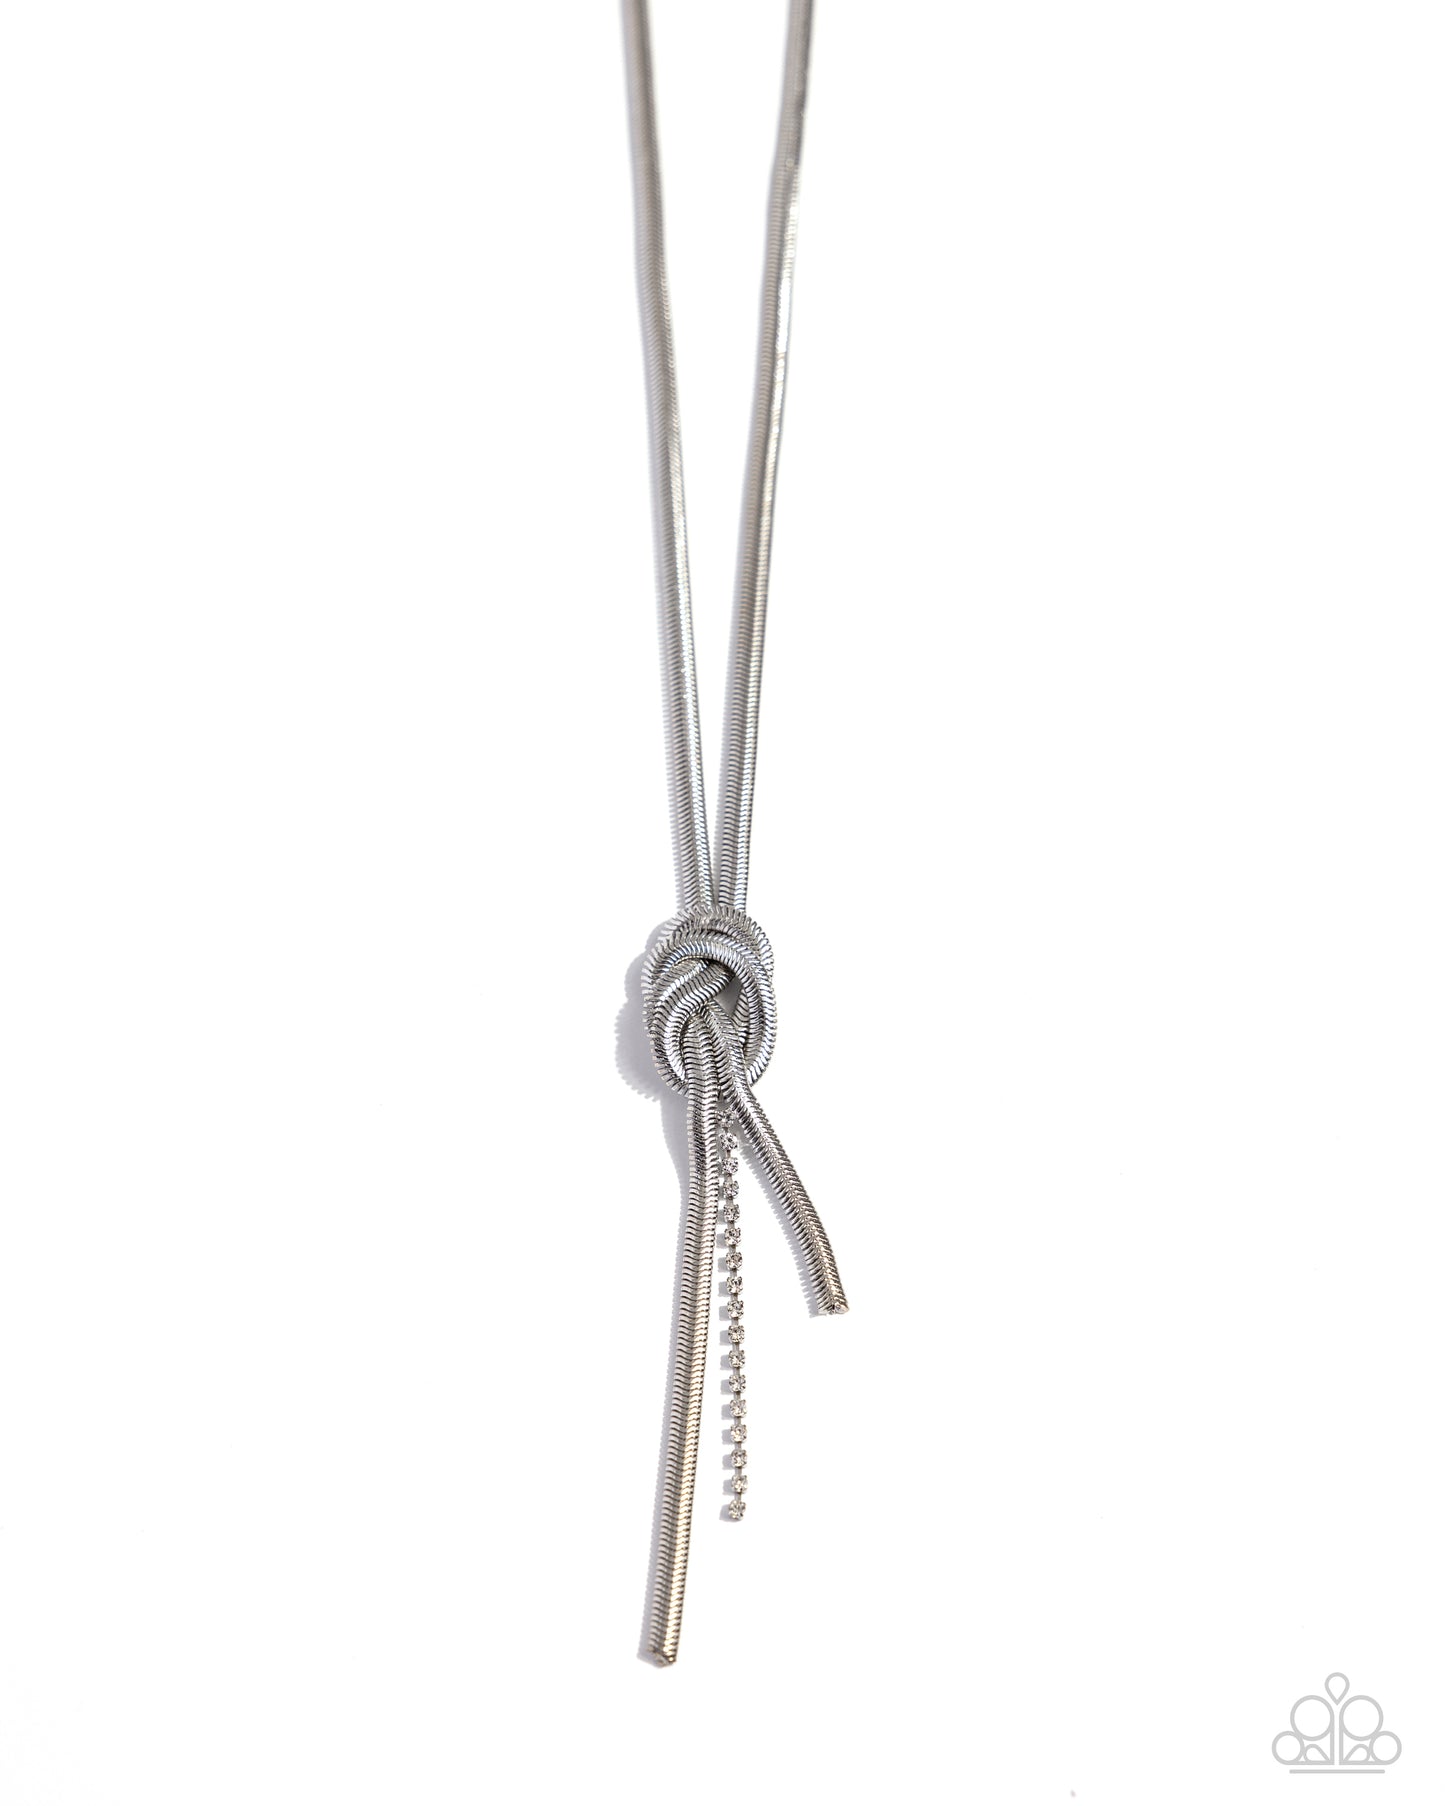 <p data-mce-fragment="1">Paparazzi Accessories - Knotted Keeper - White Necklaces an edgy collection of silver snake chains knot into an intense fringe, creating a bold industrial look. A dainty strand of white rhinestones emerges from the knot for a surprising hint of shimmery movement. Features an adjustable clasp closure.</p> <p data-mce-fragment="1"><i data-mce-fragment="1">Sold as one individual necklace. Includes one pair of matching earrings.</i></p>